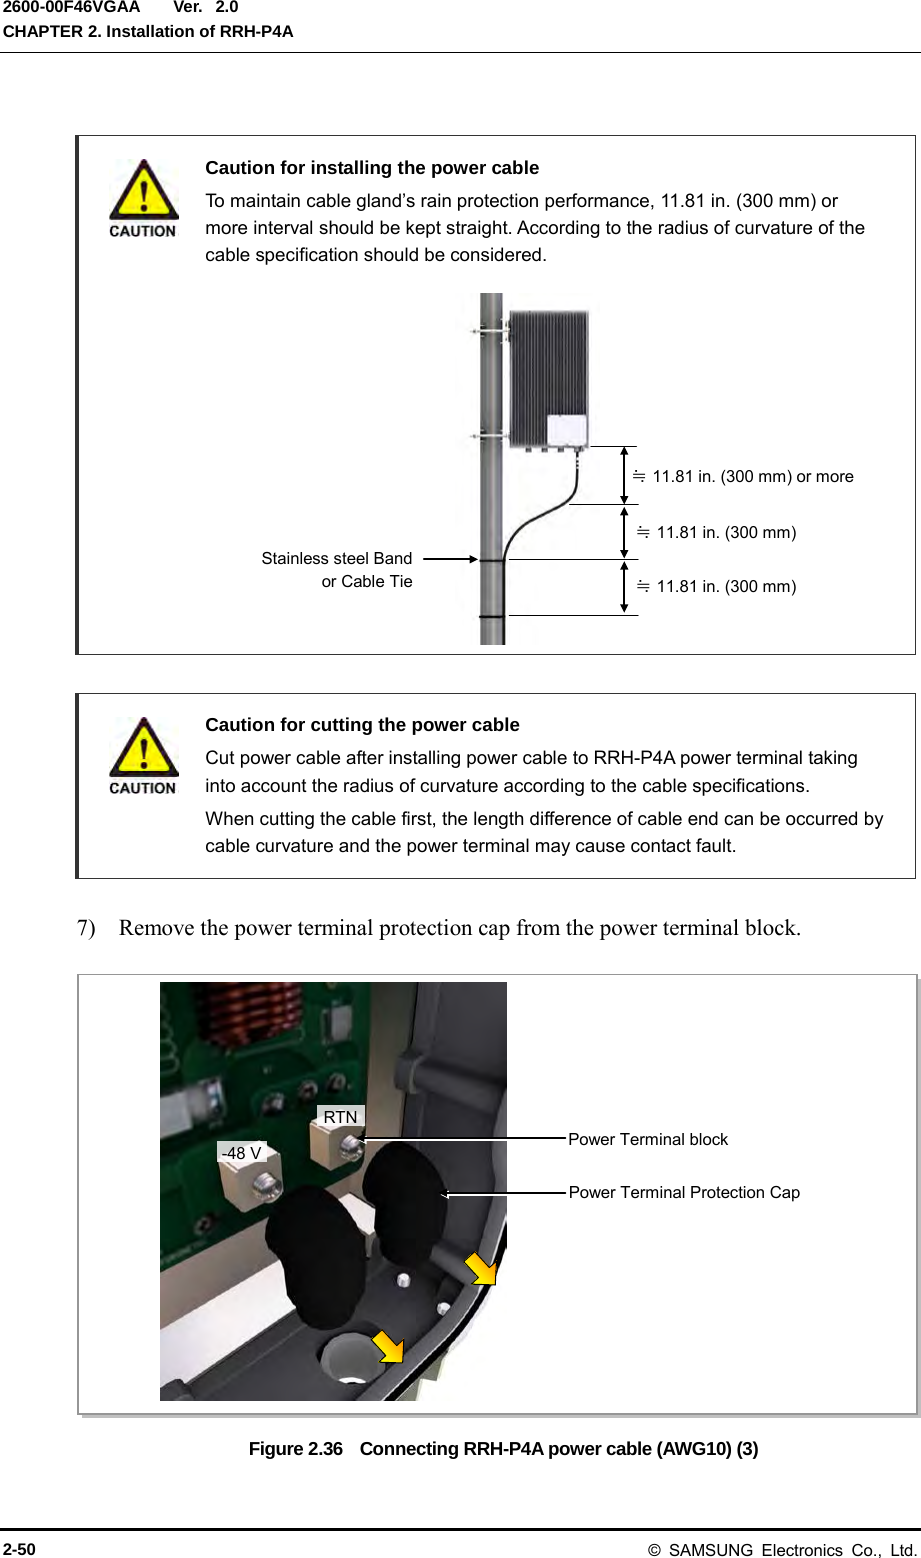  Ver.  CHAPTER 2. Installation of RRH-P4A 2600-00F46VGAA 2.0   Caution for installing the power cable  To maintain cable gland’s rain protection performance, 11.81 in. (300 mm) or more interval should be kept straight. According to the radius of curvature of the cable specification should be considered.              Caution for cutting the power cable    Cut power cable after installing power cable to RRH-P4A power terminal taking into account the radius of curvature according to the cable specifications.  When cutting the cable first, the length difference of cable end can be occurred by cable curvature and the power terminal may cause contact fault.  7)    Remove the power terminal protection cap from the power terminal block.  Figure 2.36    Connecting RRH-P4A power cable (AWG10) (3) Stainless steel Band  or Cable Tie  ≒ 11.81 in. (300 mm) or more ≒ 11.81 in. (300 mm) ≒ 11.81 in. (300 mm) RTN -48 V Power Terminal Protection Cap Power Terminal block 2-50 © SAMSUNG Electronics Co., Ltd. 